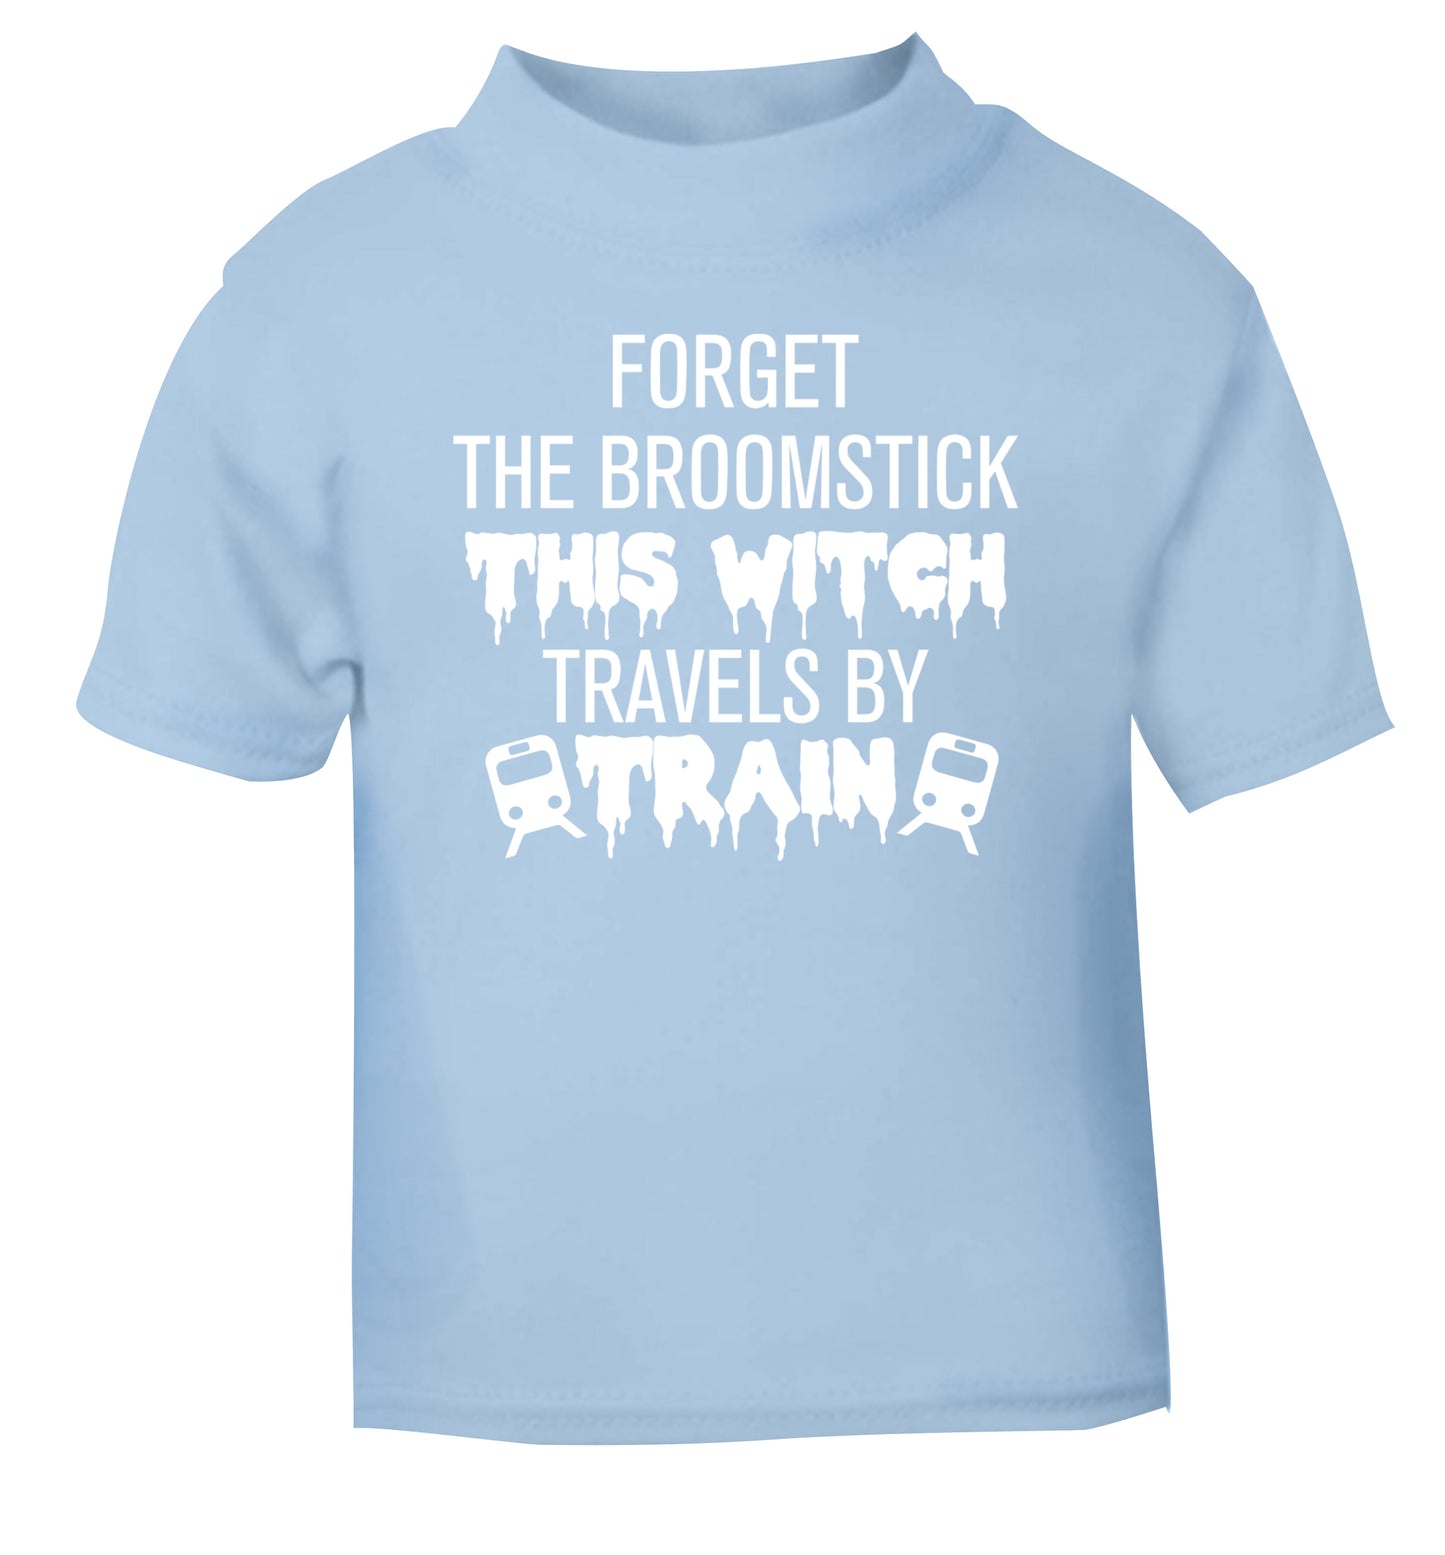 Forget the broomstick this witch travels by train light blue Baby Toddler Tshirt 2 Years